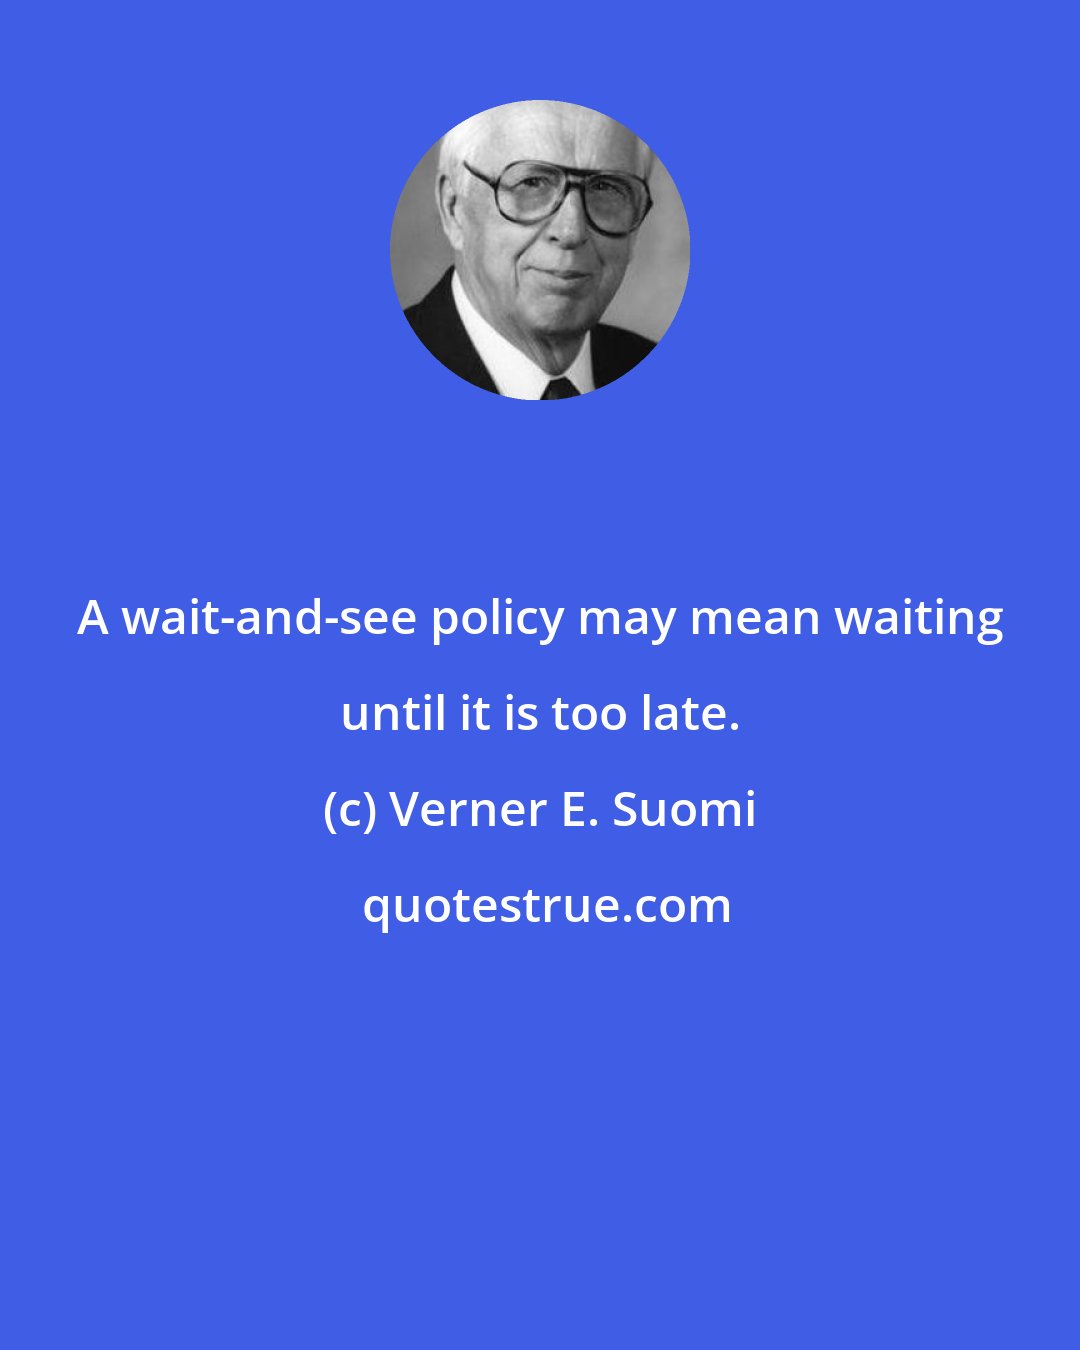 Verner E. Suomi: A wait-and-see policy may mean waiting until it is too late.